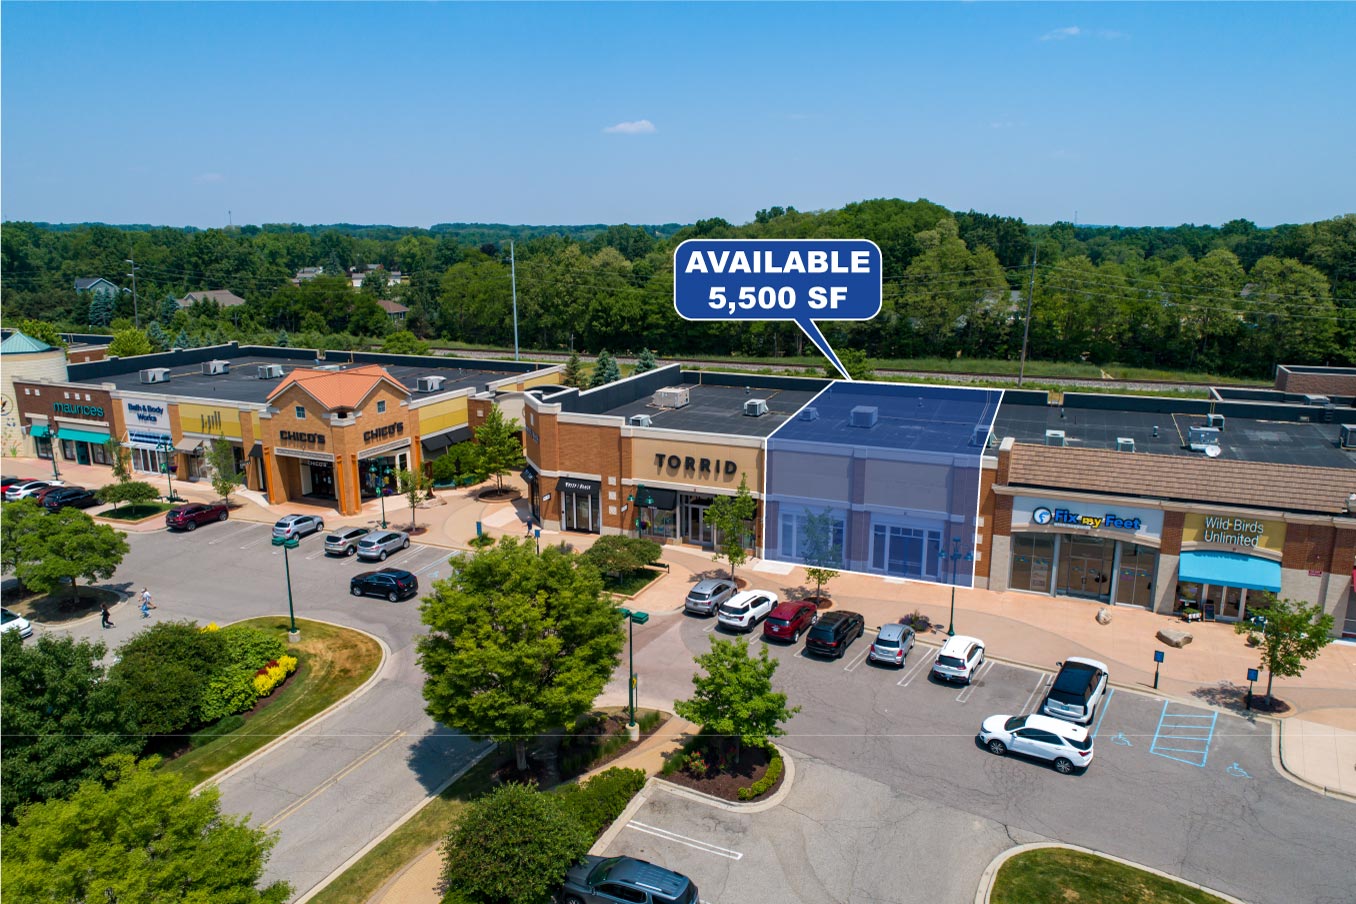 Green Oak Village Place 5,500 SF available for lease